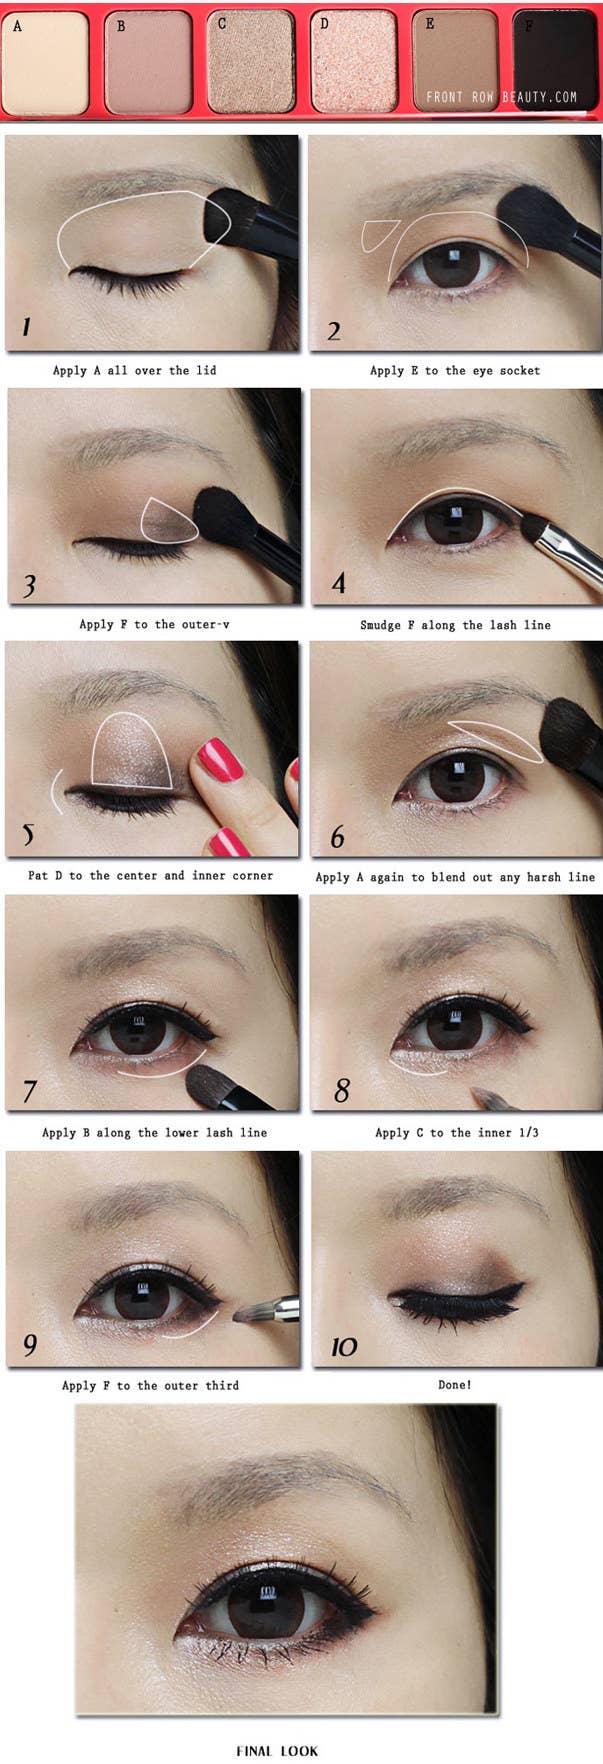 A Guide to Asian Makeup: Products and Tips - College Fashion